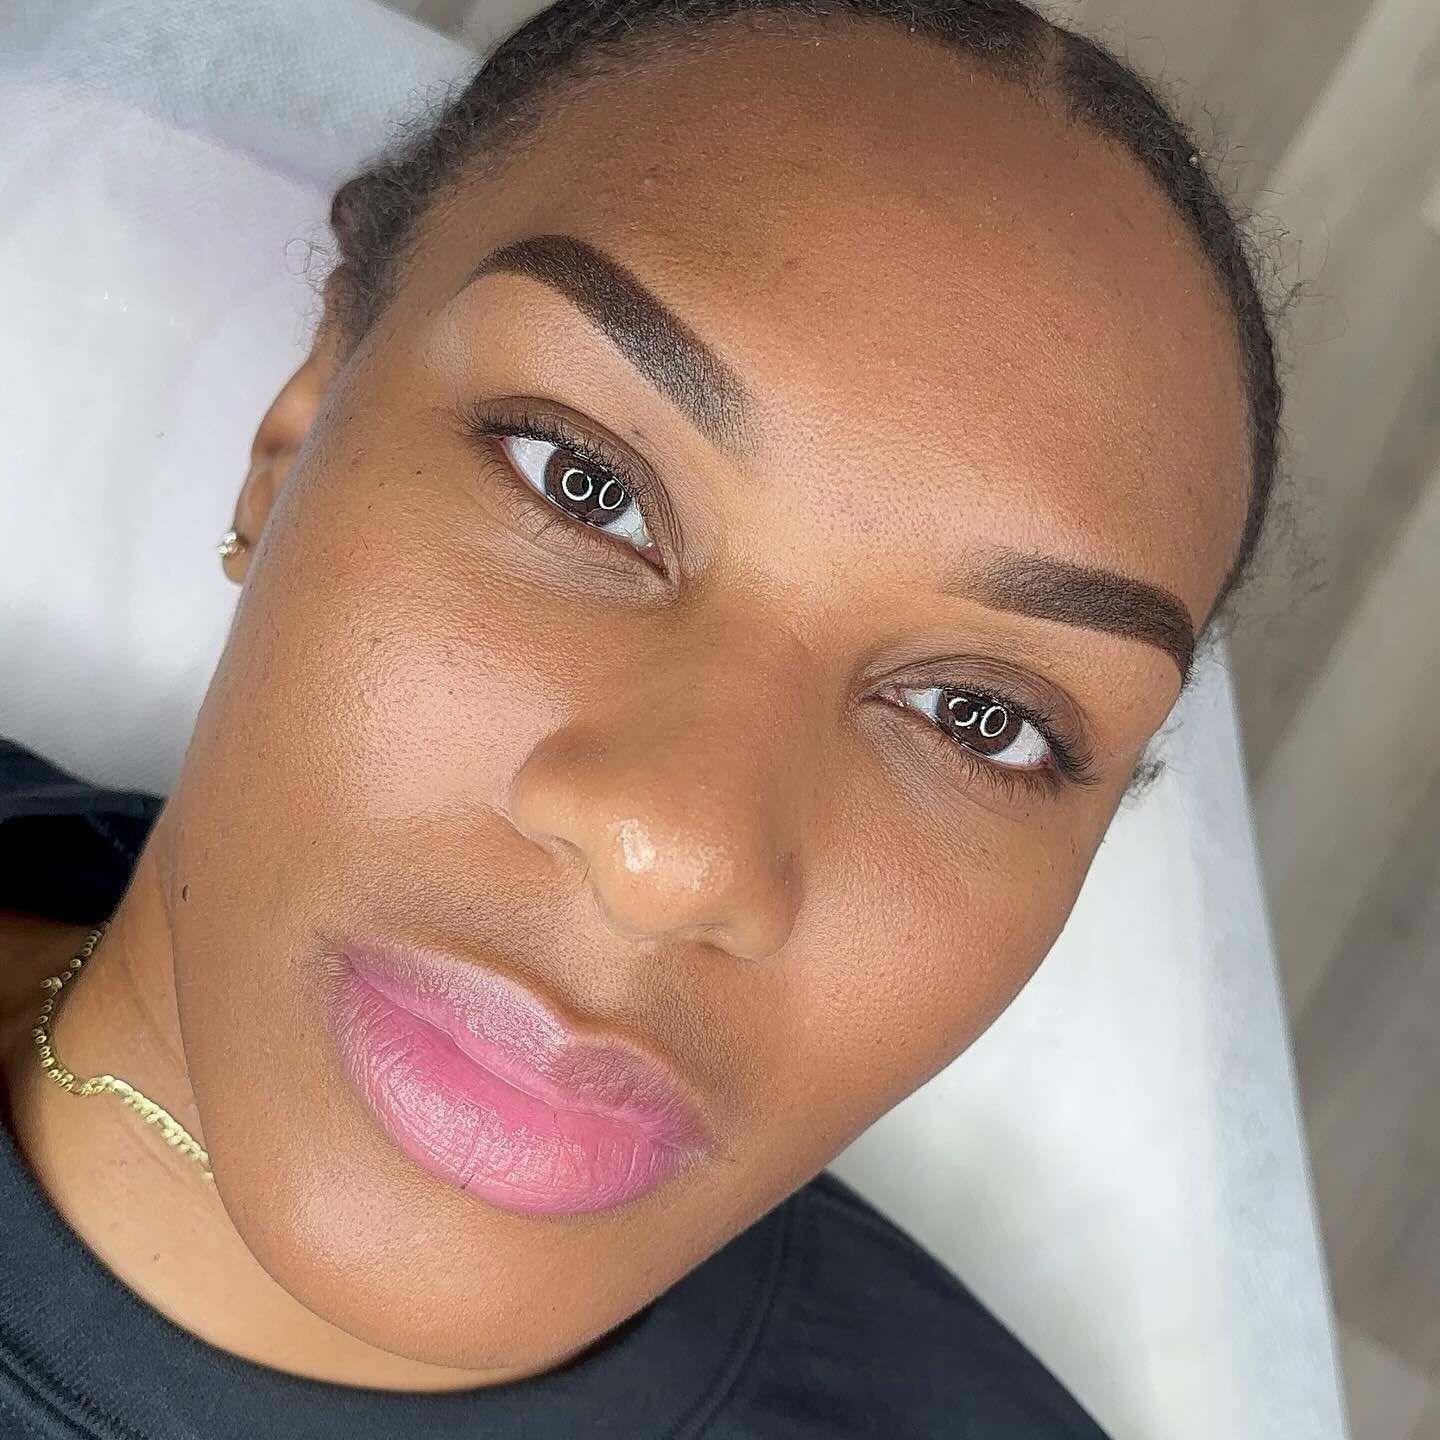 Are your brows weekend ready? 
Service: Henna Brows 😍
&bull;
&bull;
&bull;
&bull;
&bull; 

#TintedPerfection  #atlantaeyebrows #atlantabrows #hennabrows #tintedeyebrows #atlantaesthetician #hennabrowsatlanta #browlaminationatlanta #HybridTintBrowsAt